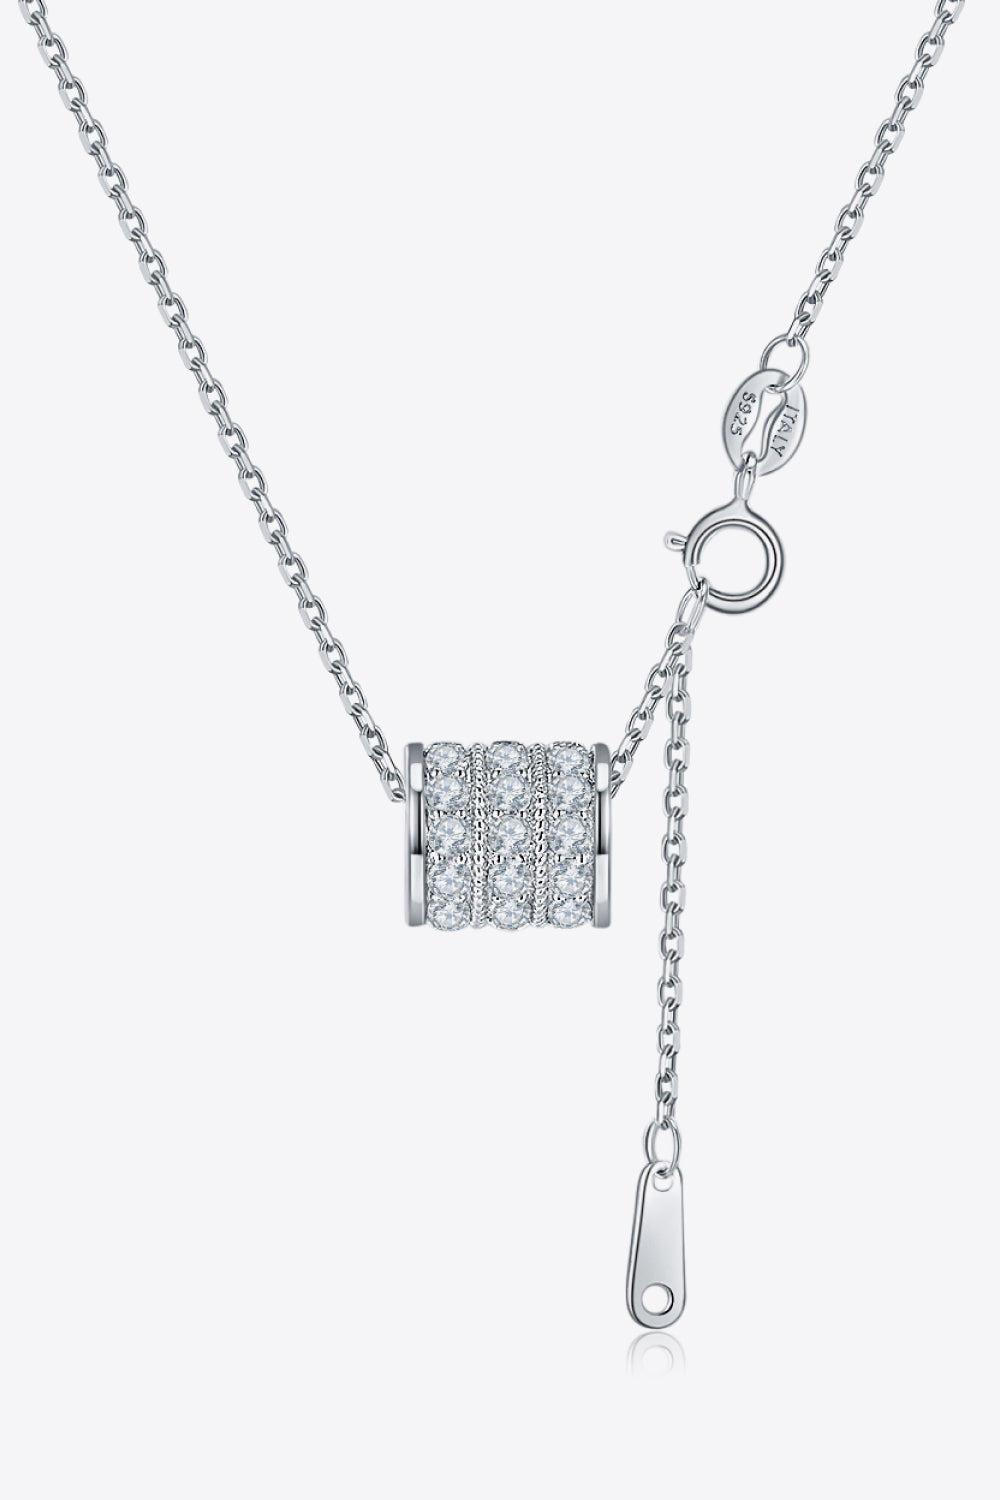 Moissanite Platinum-Plated 925 Sterling Silver Necklace